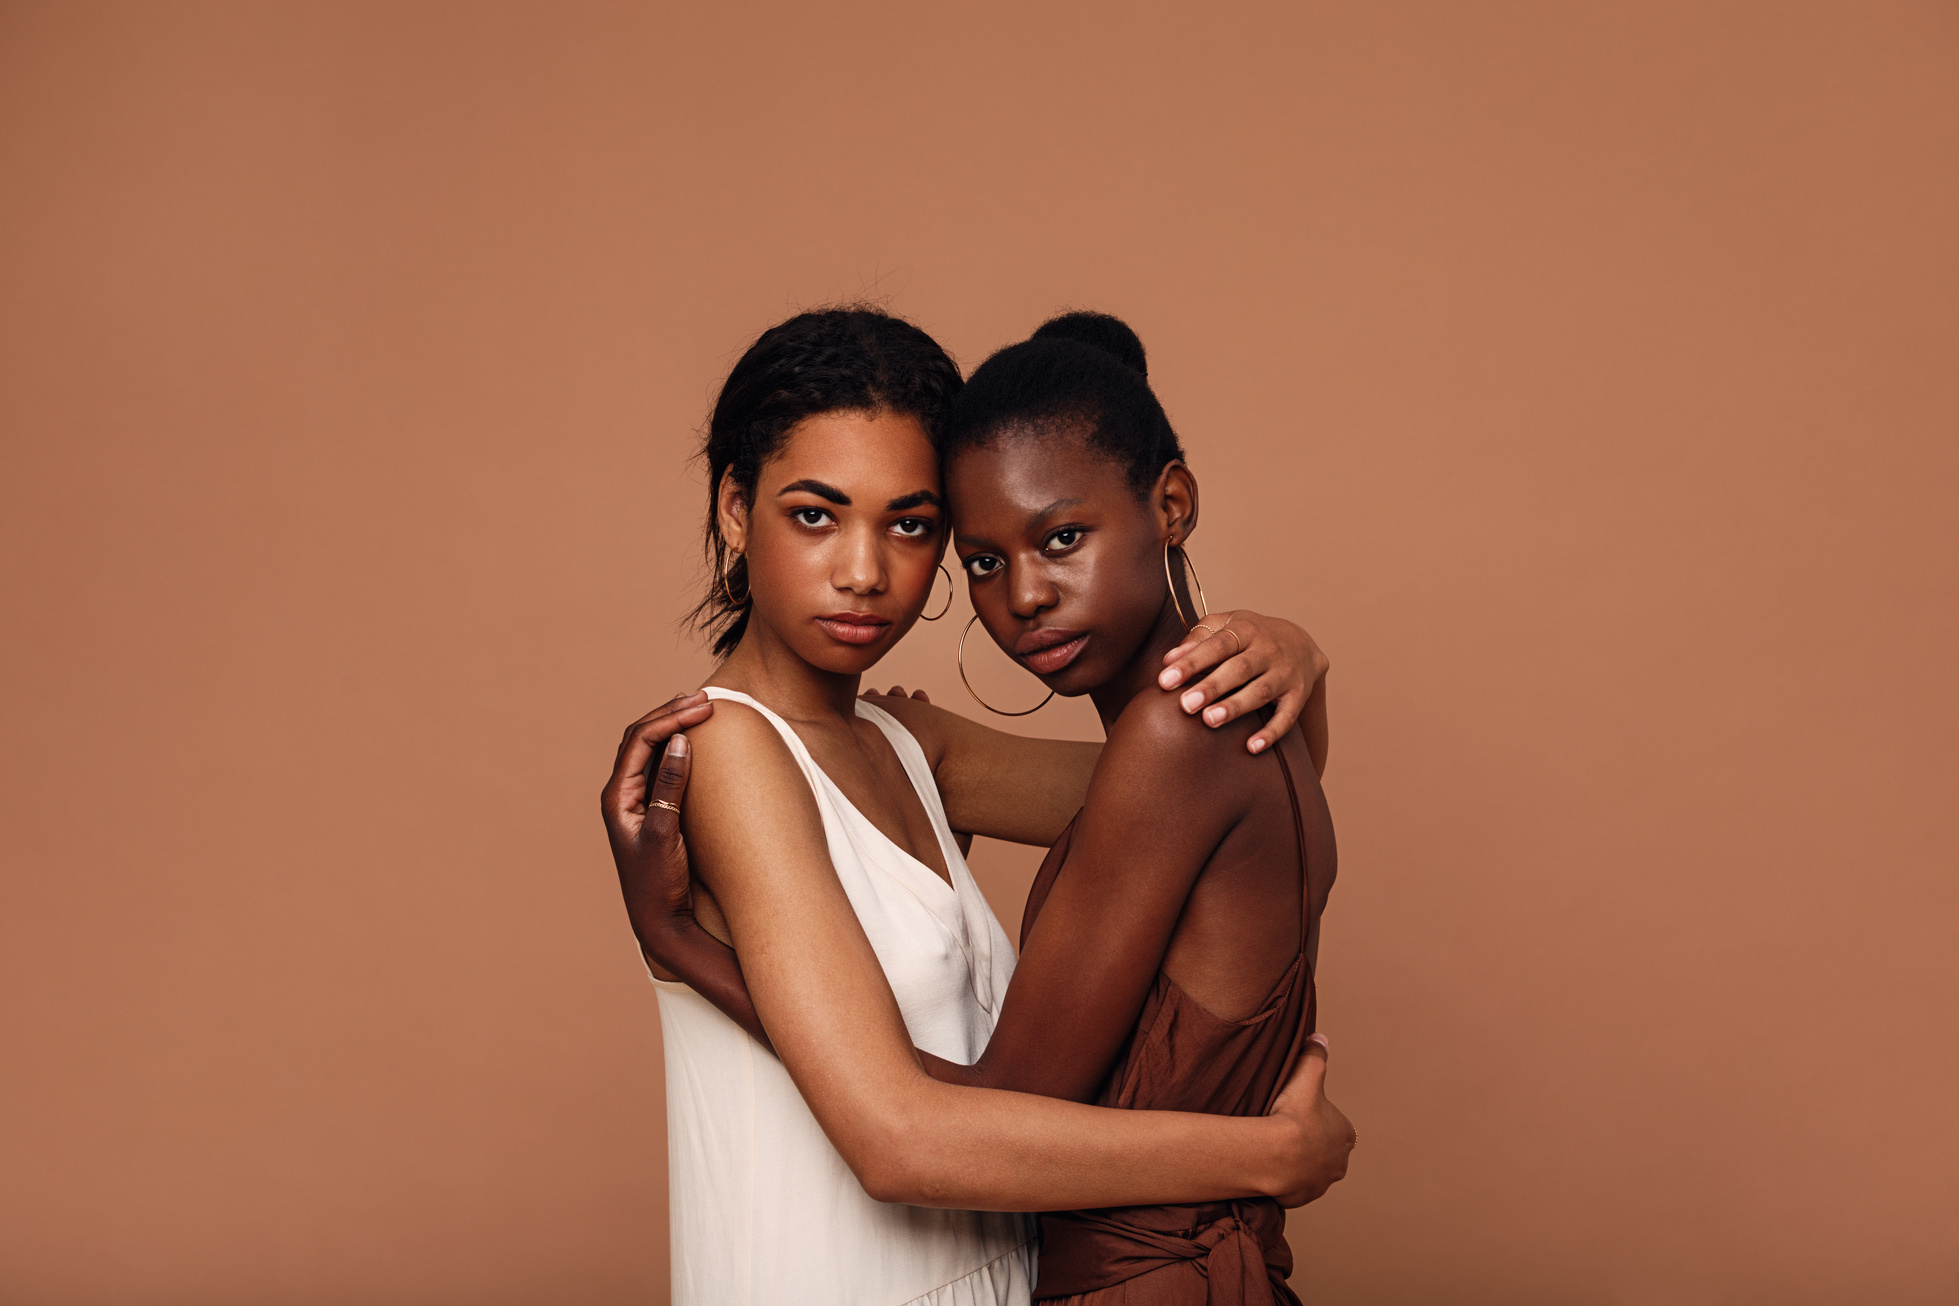 Portrait of Two Females Embracing Each Other